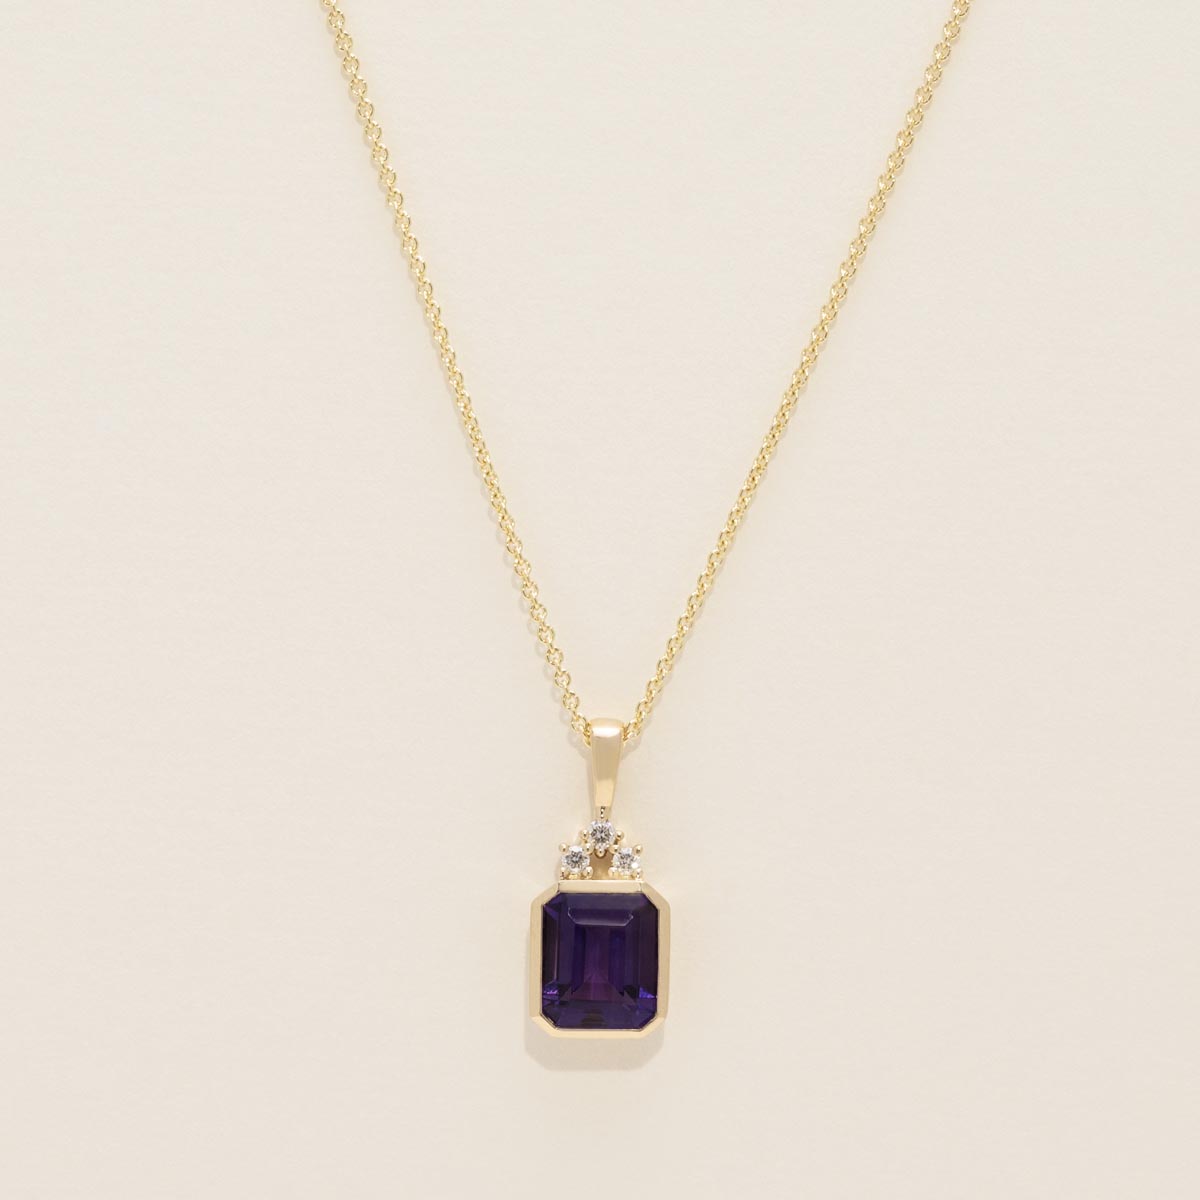 Emerald Cut Amethyst Necklace in 14kt Yellow Gold with Diamond (1/20ct tw)